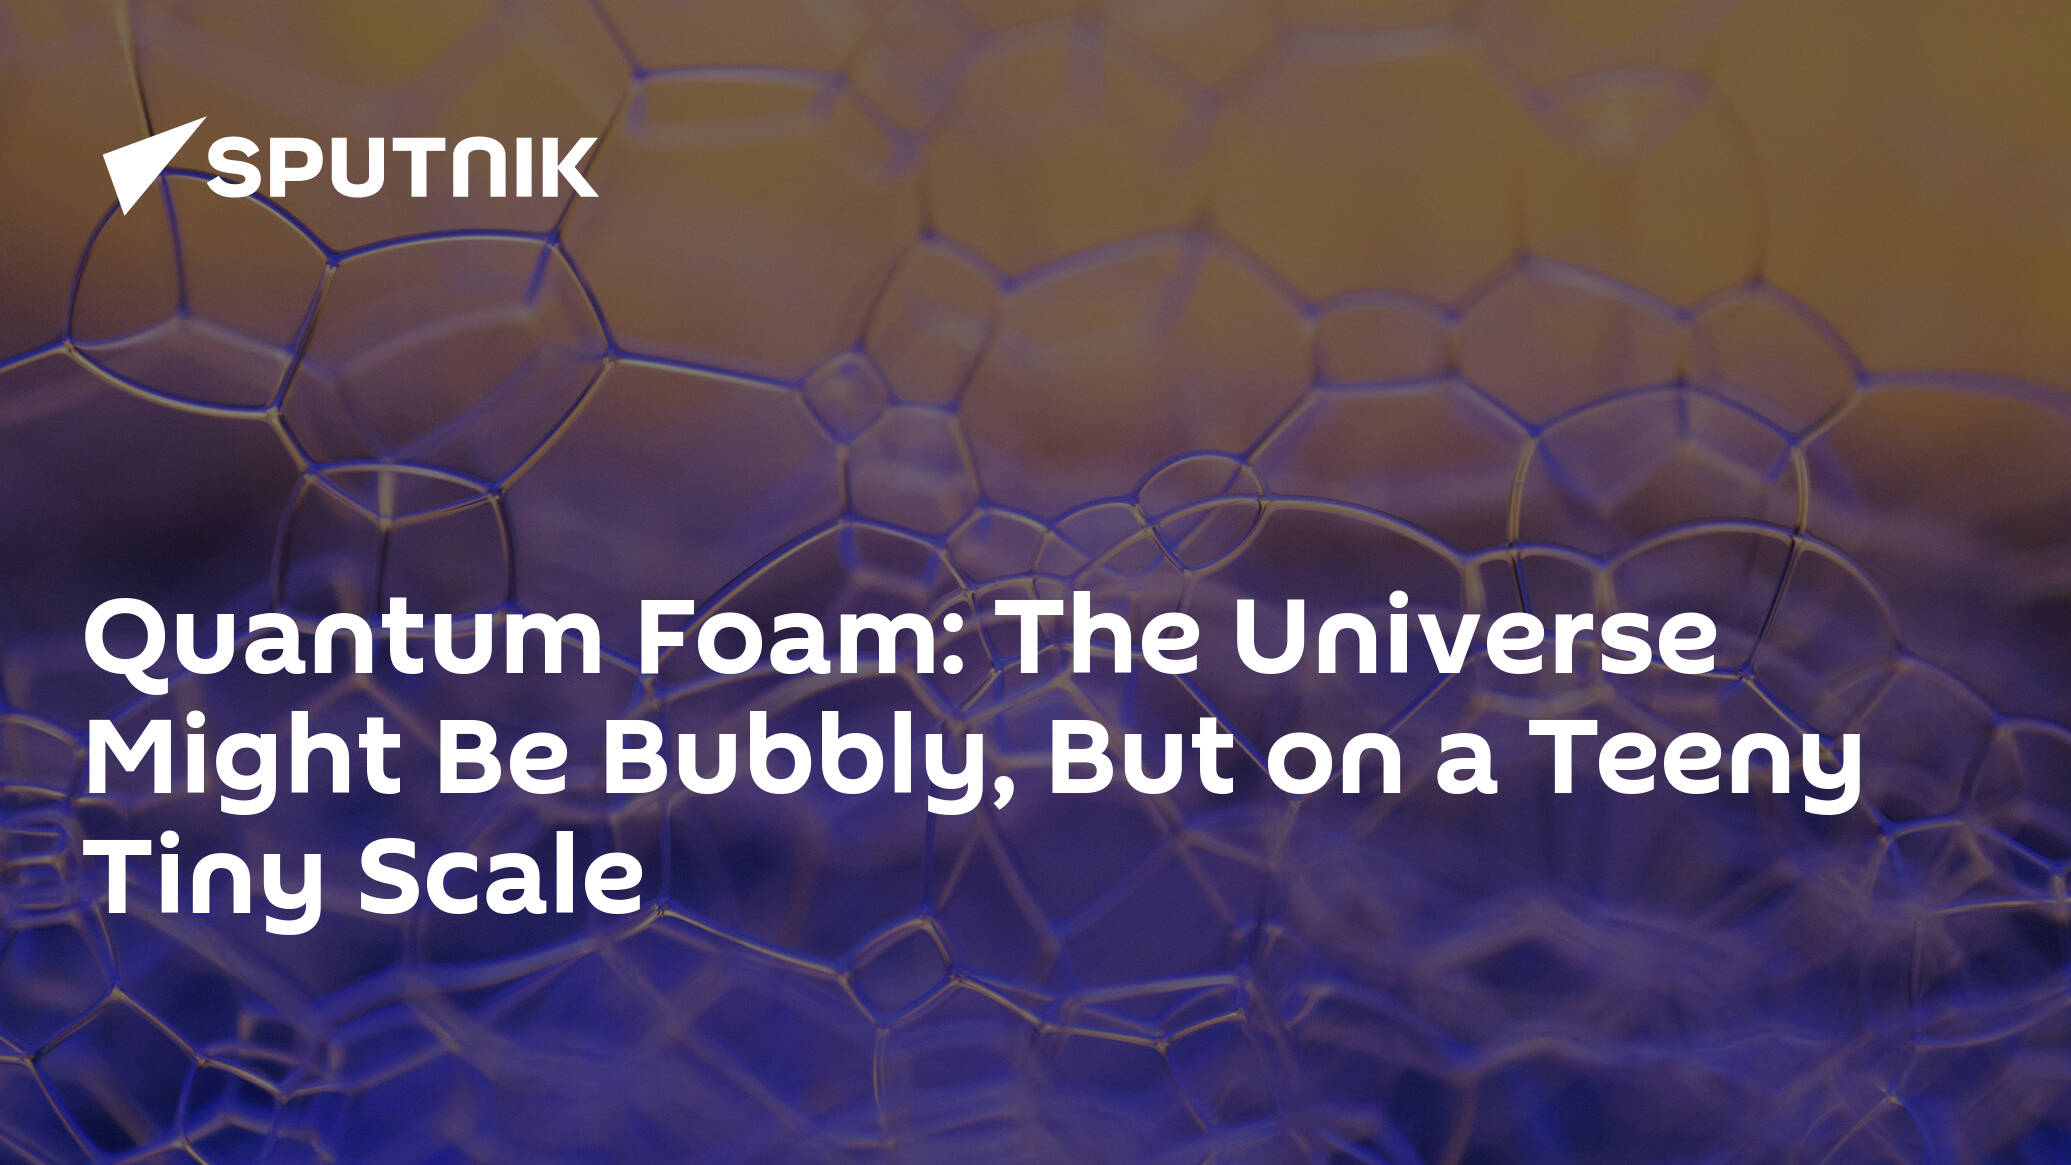 Quantum Foam: The Universe Might Be Bubbly, But on a Teeny Tiny Scale